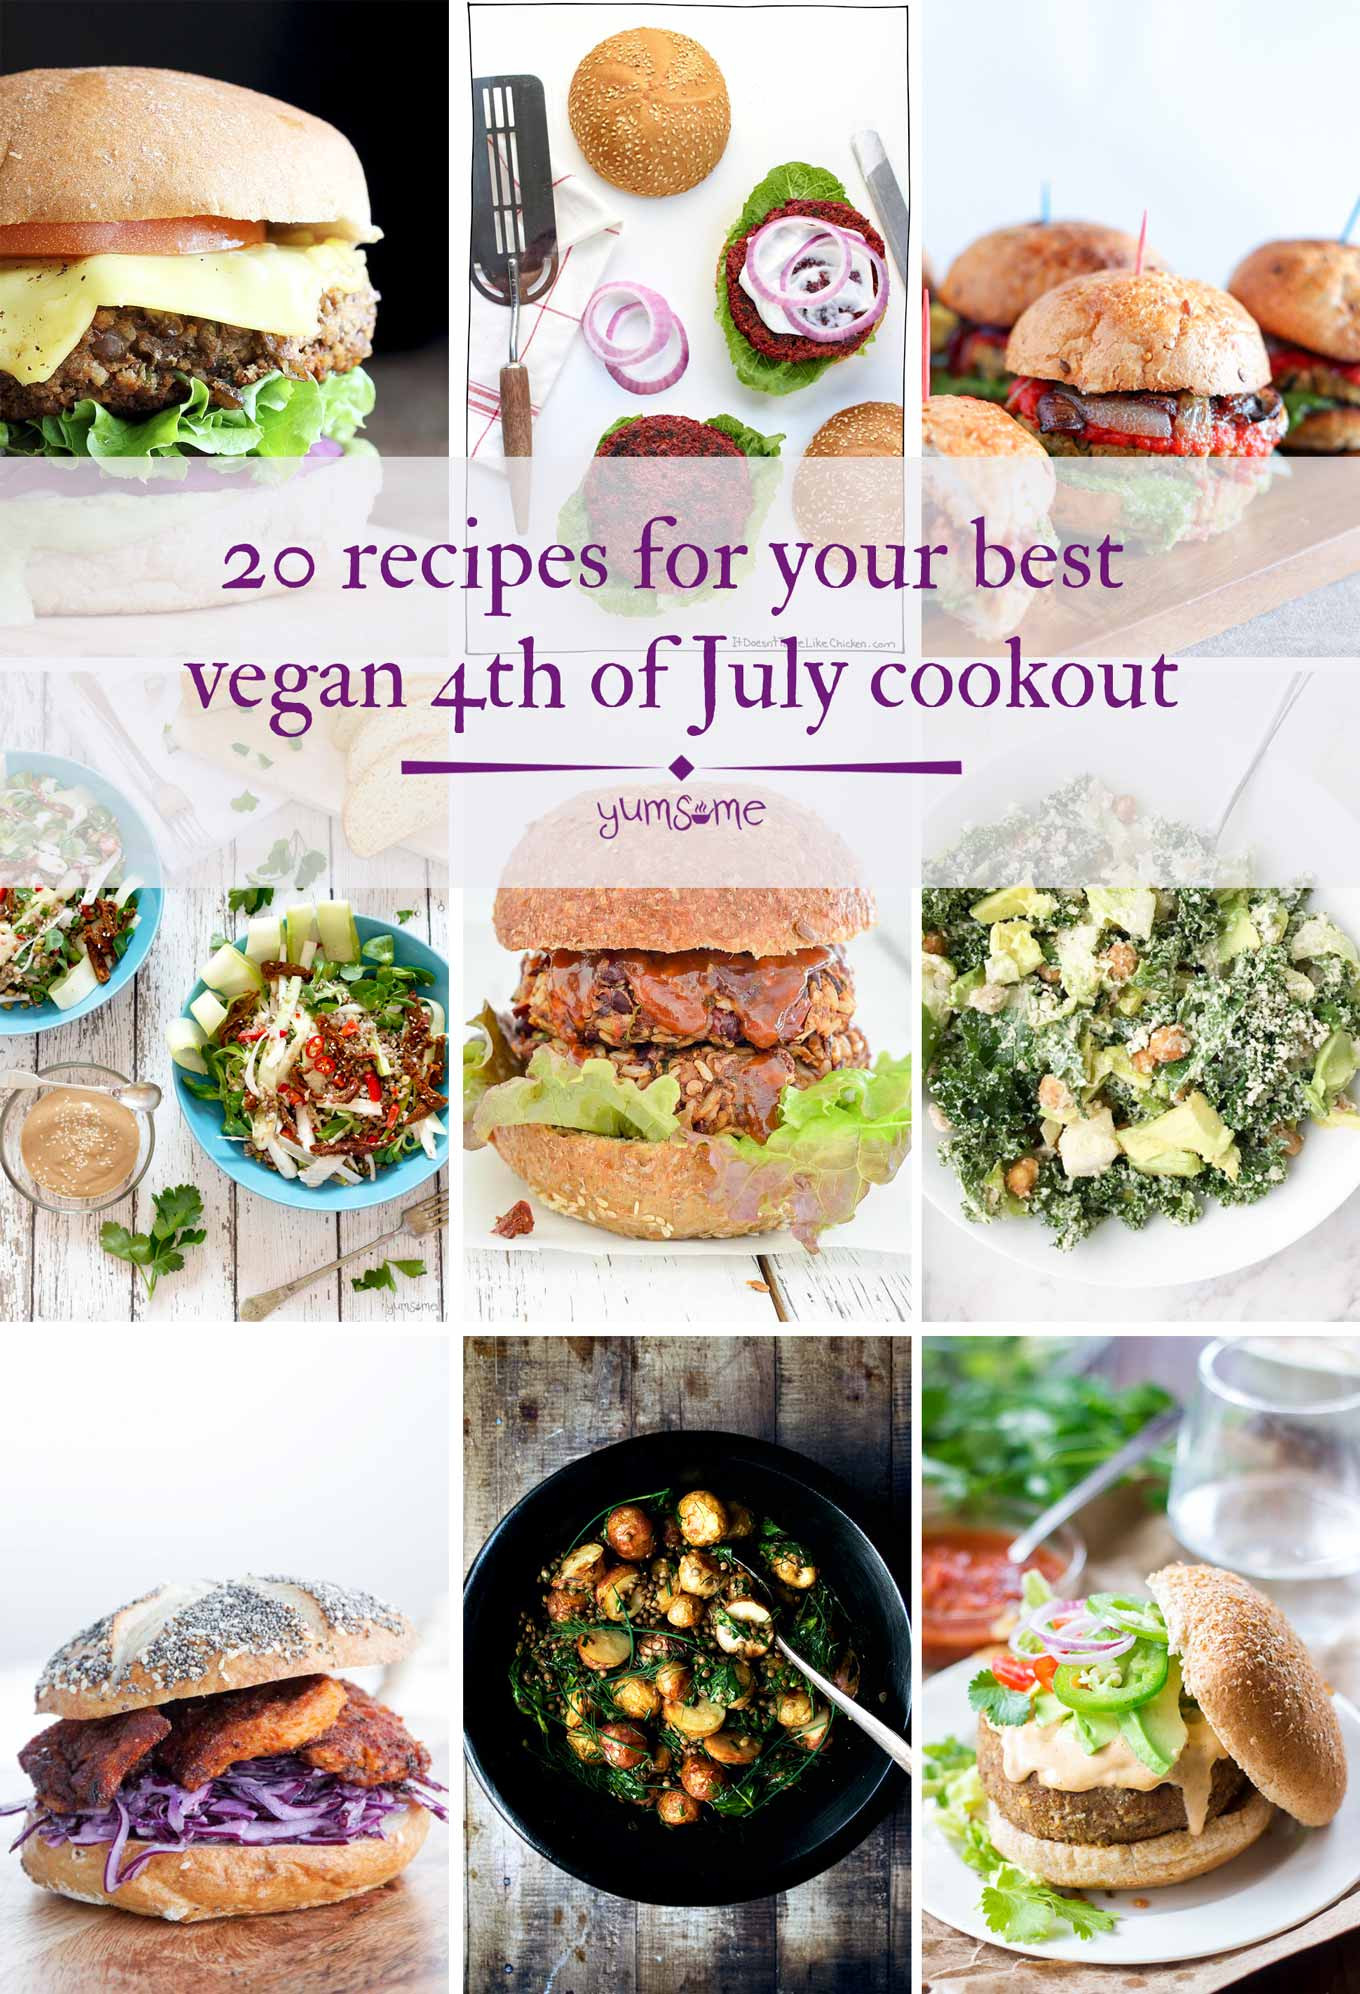 Vegan 4Th Of July Recipes
 20 Recipes For Your Best Vegan 4th of July Cookout